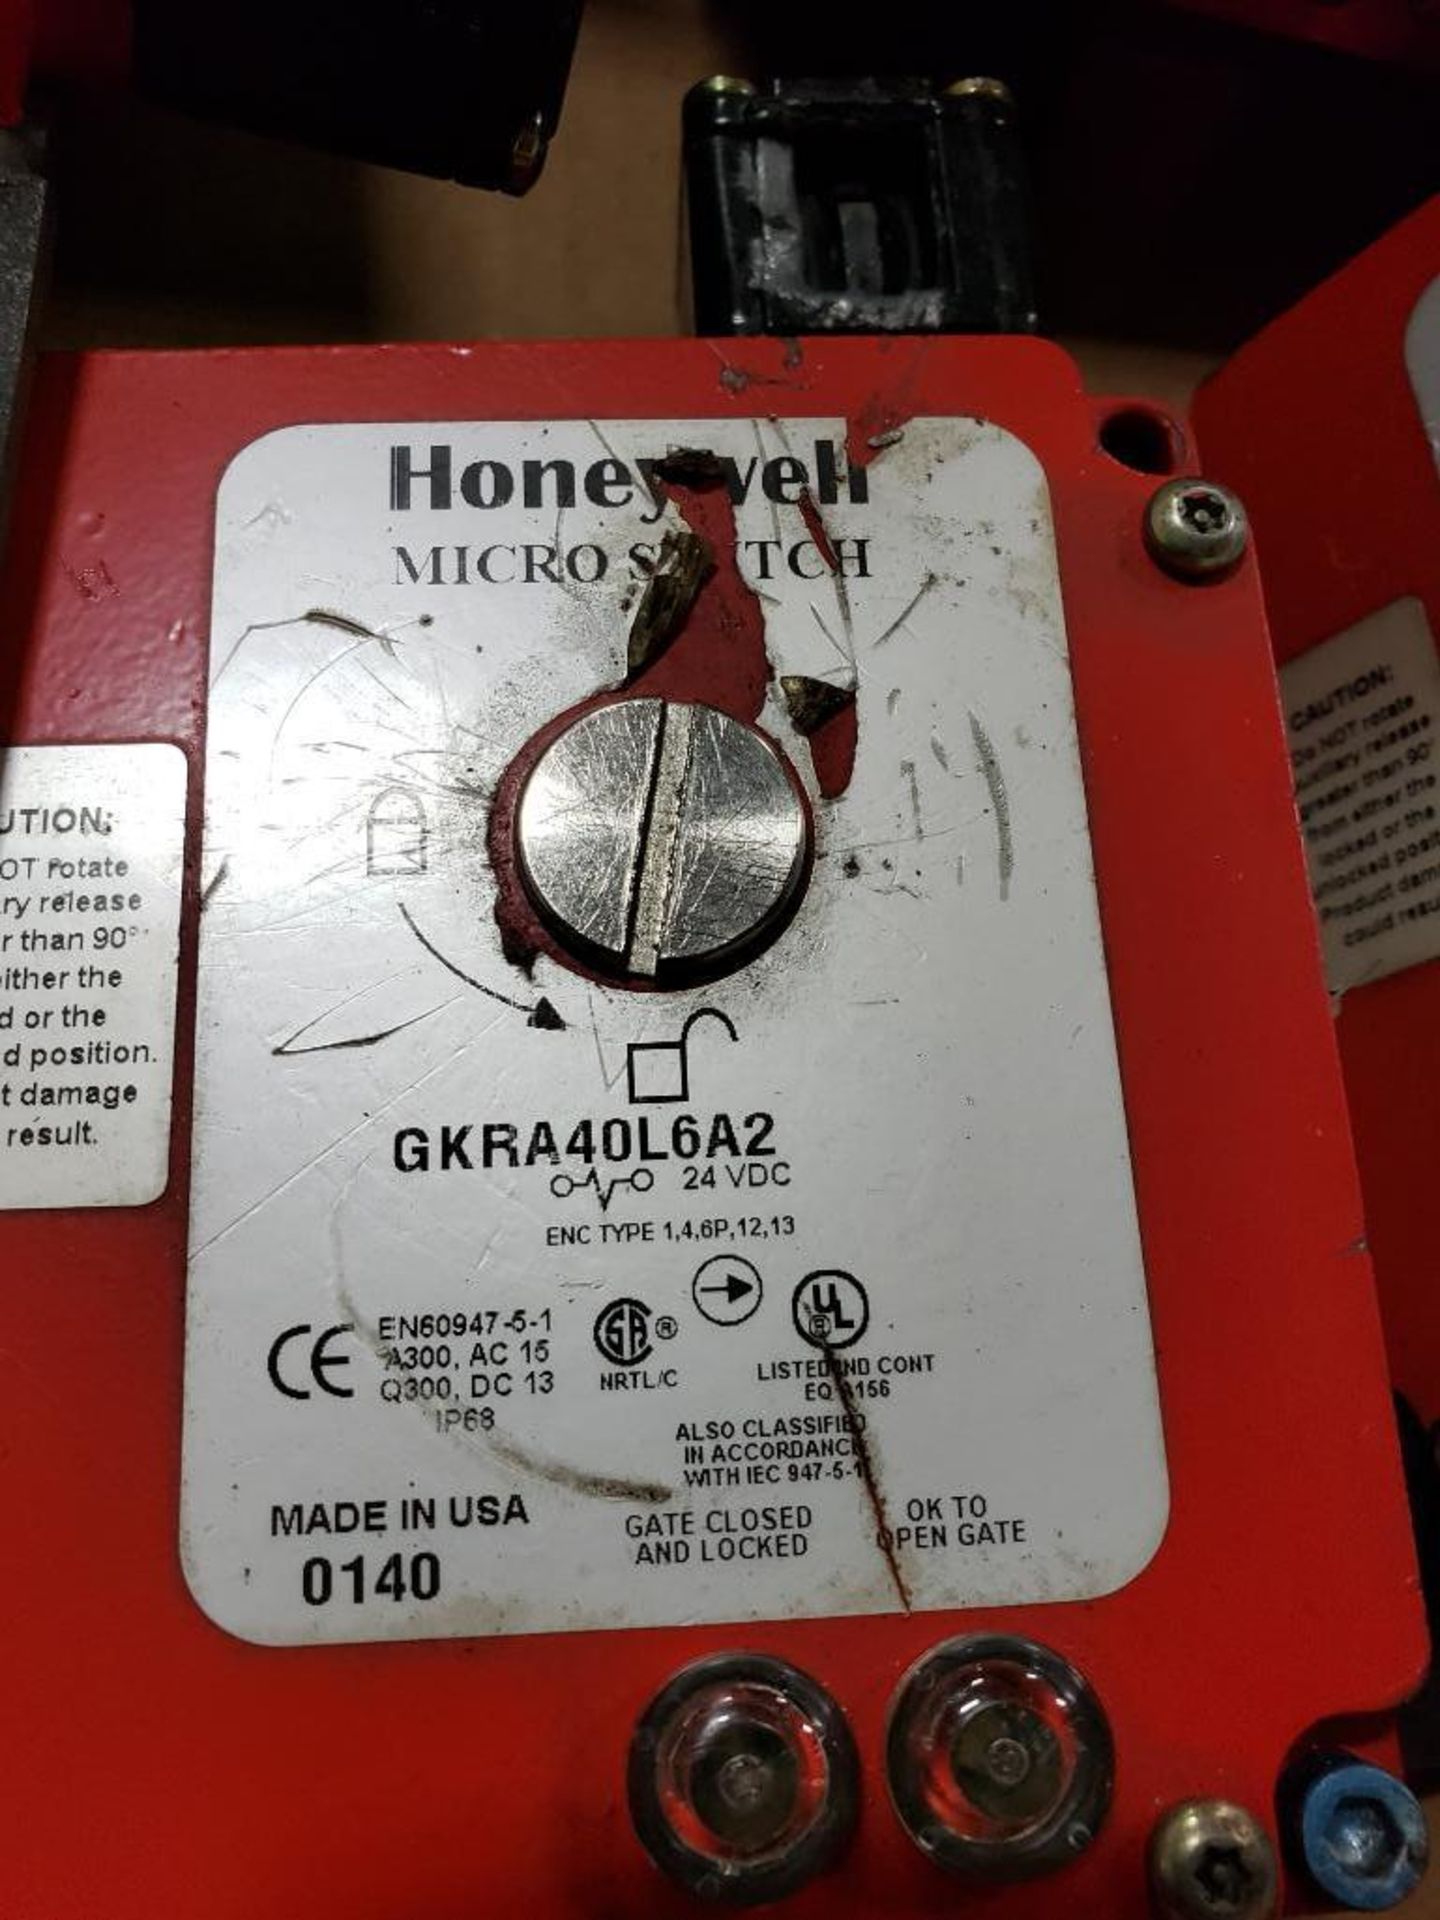 Qty 5 - Honeywell Microswitch. Part number GKLA40L6A2. - Image 2 of 2